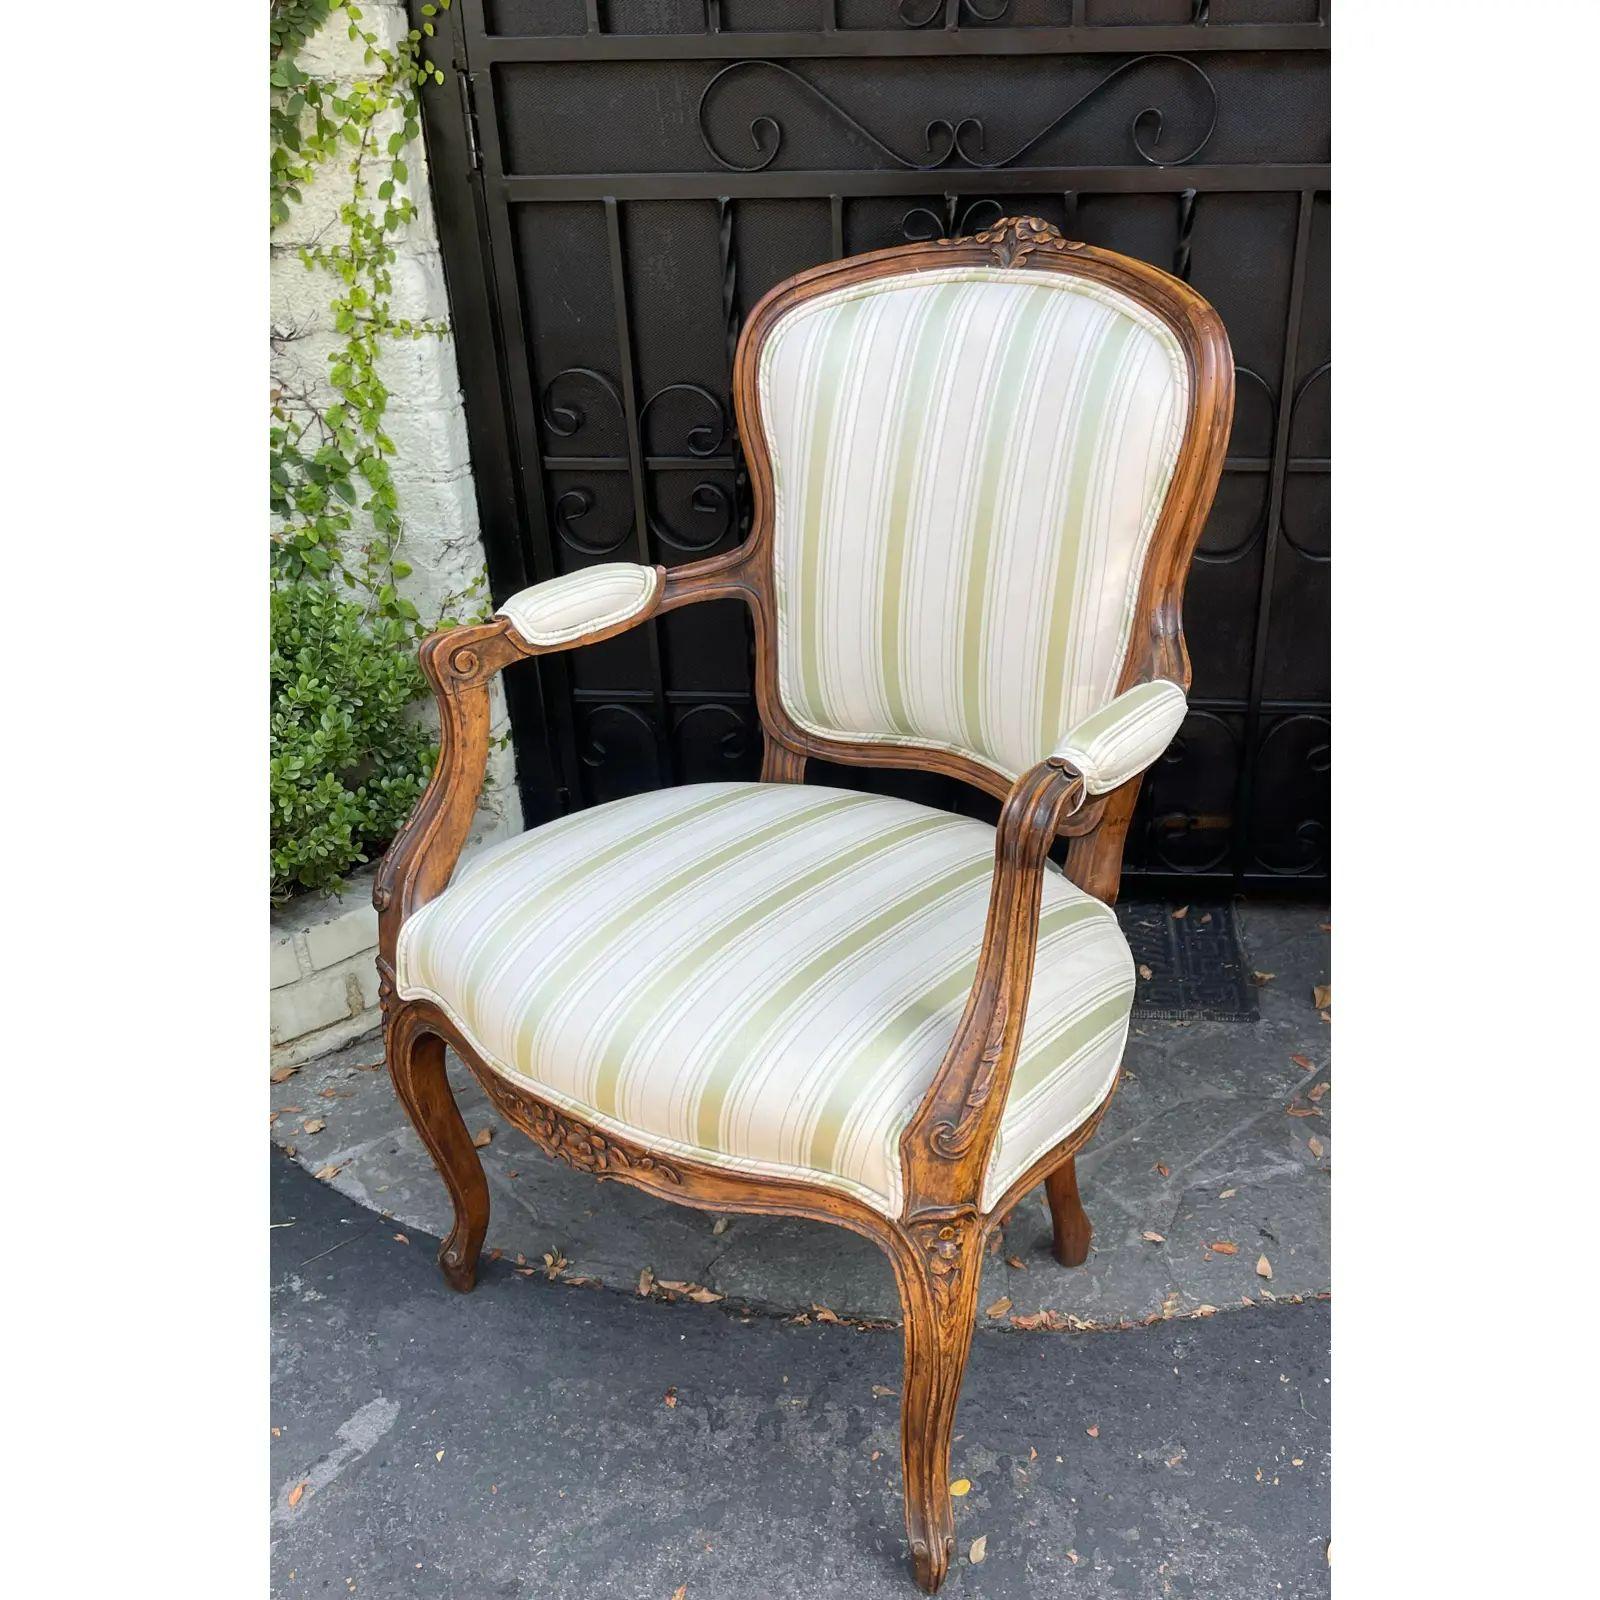 Antique 18th C French Provincial Carved Mahogany Fauteuil Arm Chair

Additional information: 
Materials: Cotton, Mahogany, Silk
Please note that this item contains materials that are legally subject to a special export process that may extend the